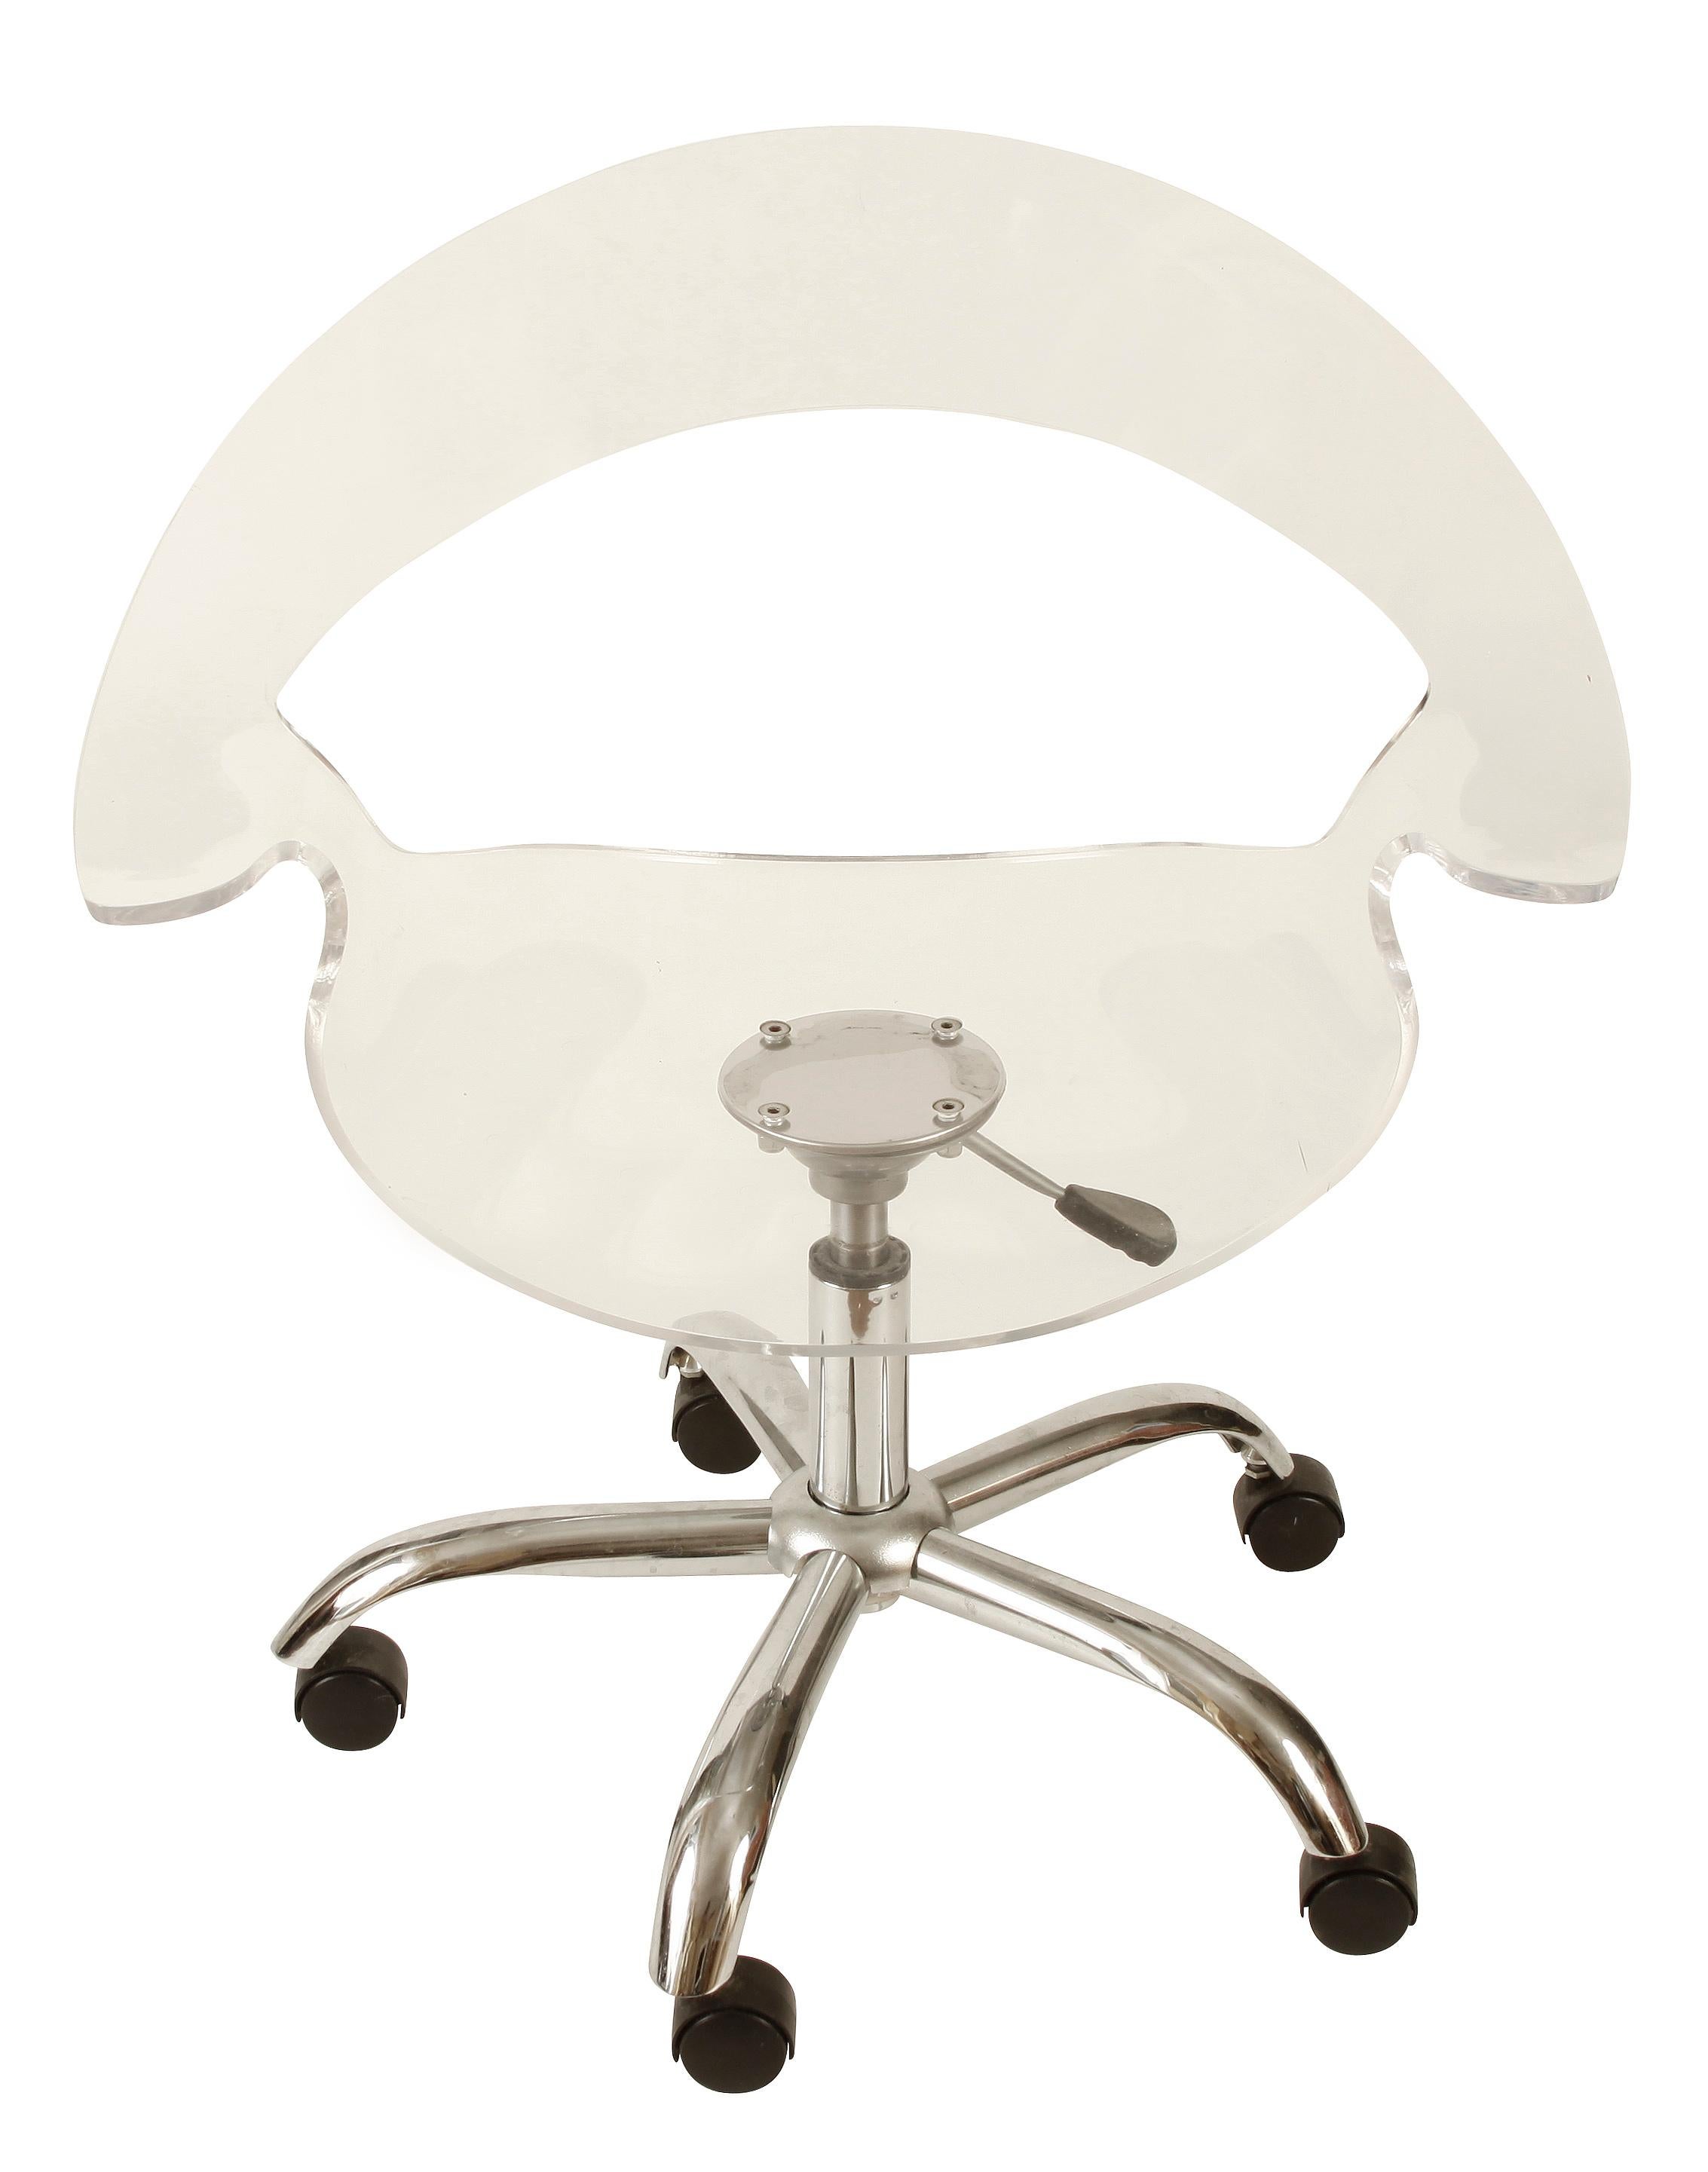 Lucite desk chair on chrome base with wheels. Adjustable height. Perfect for a desk or office.